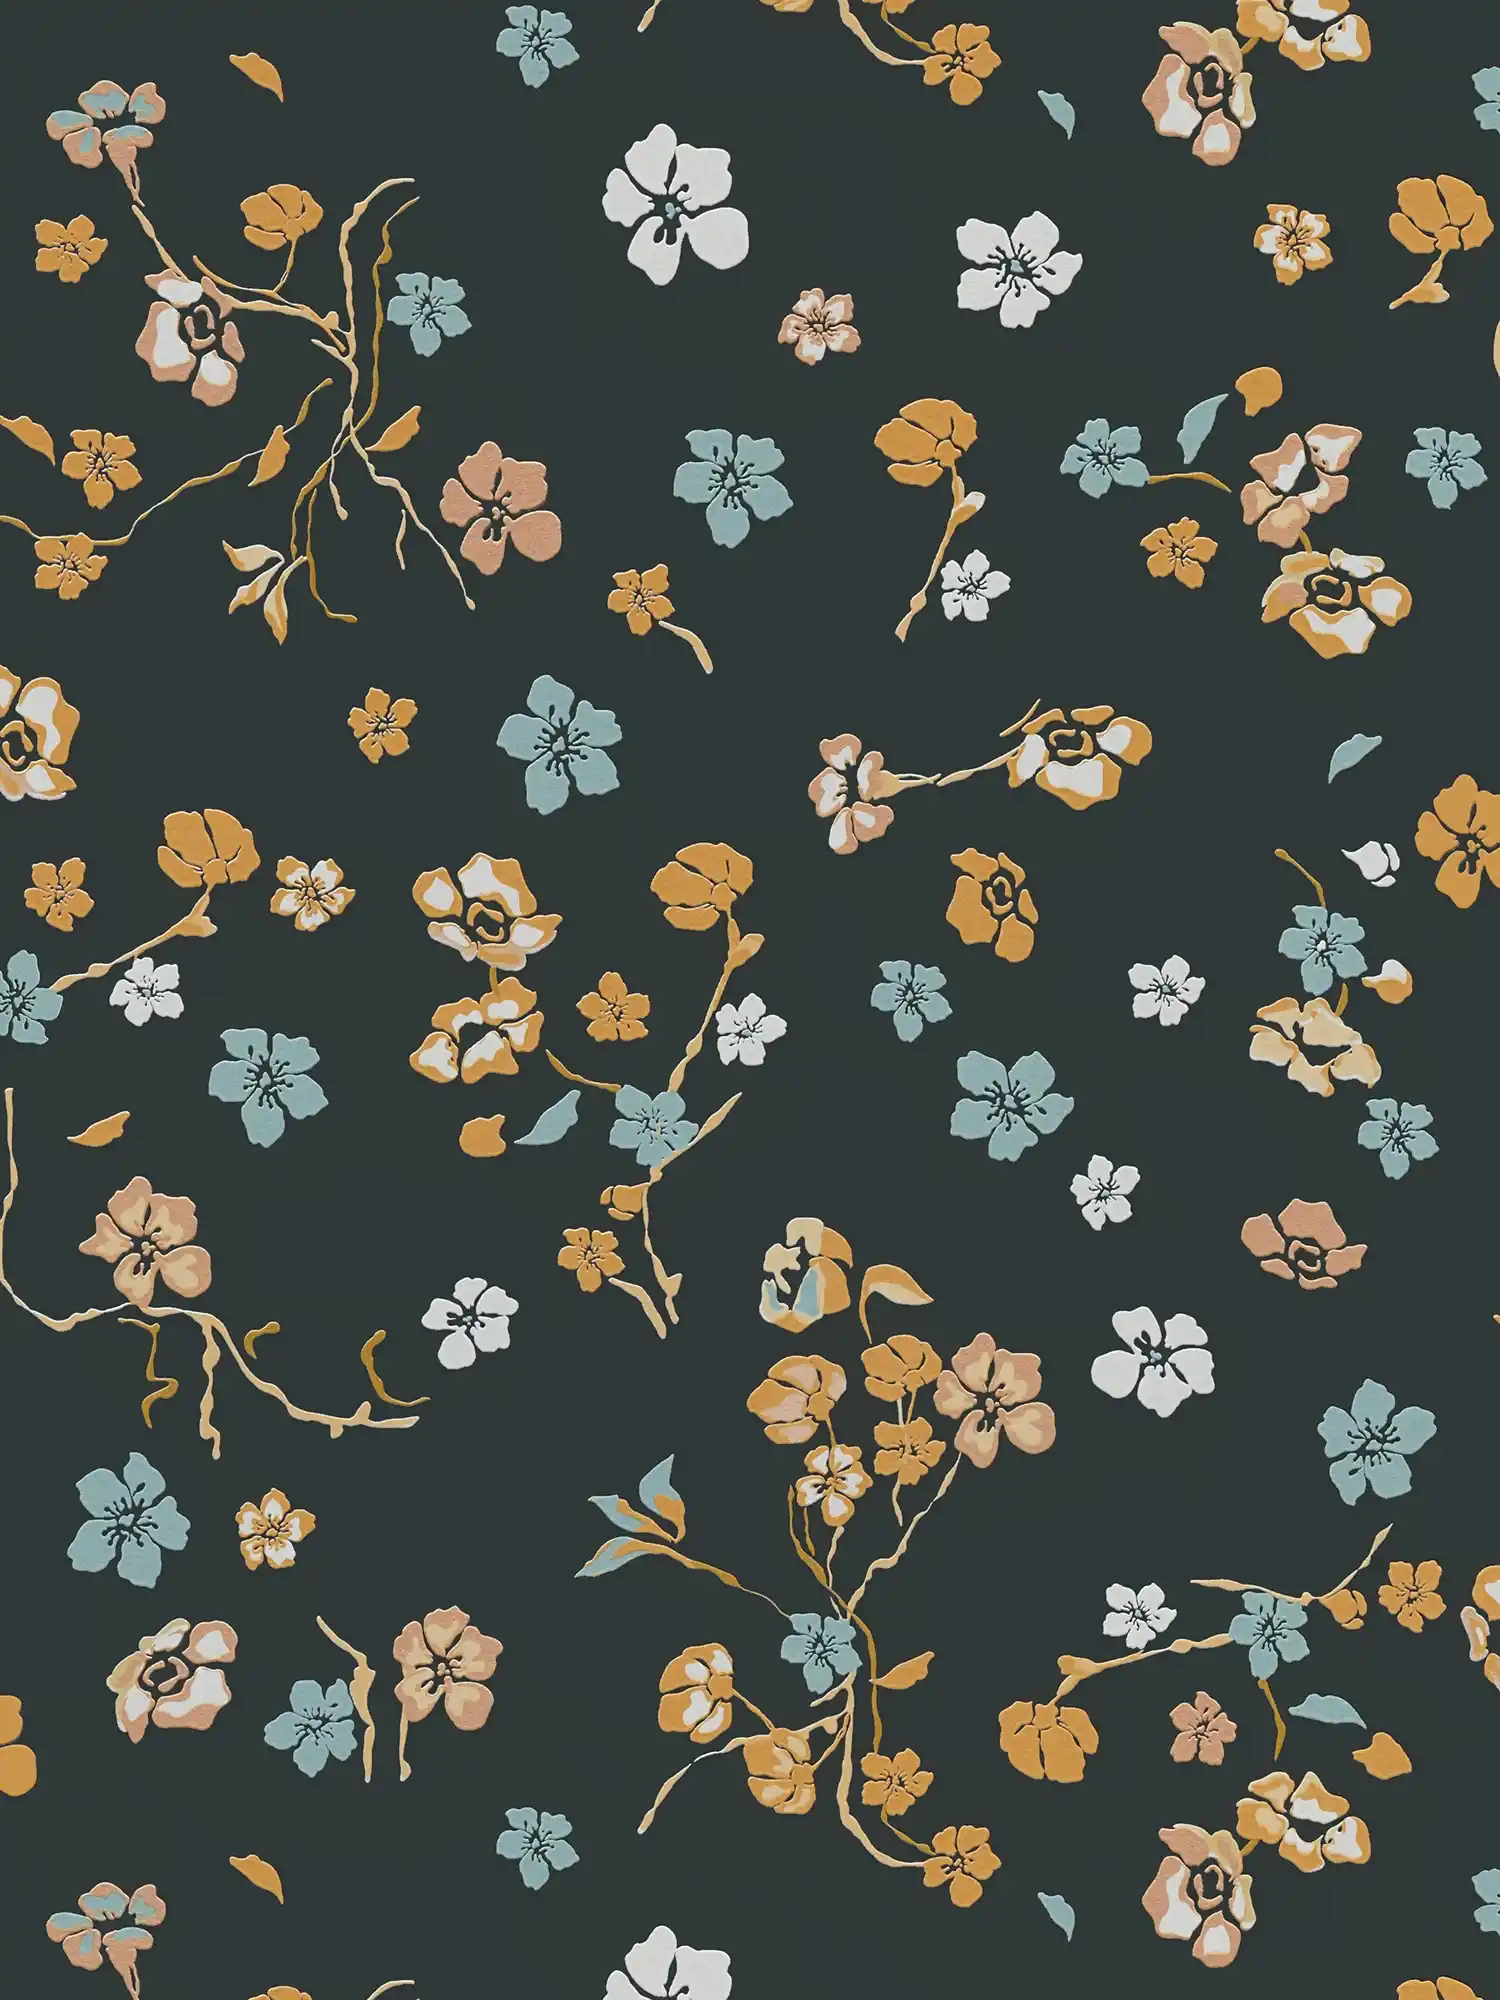 Floral wallpaper with glossy effect & textured pattern - black, gold, turquoise
